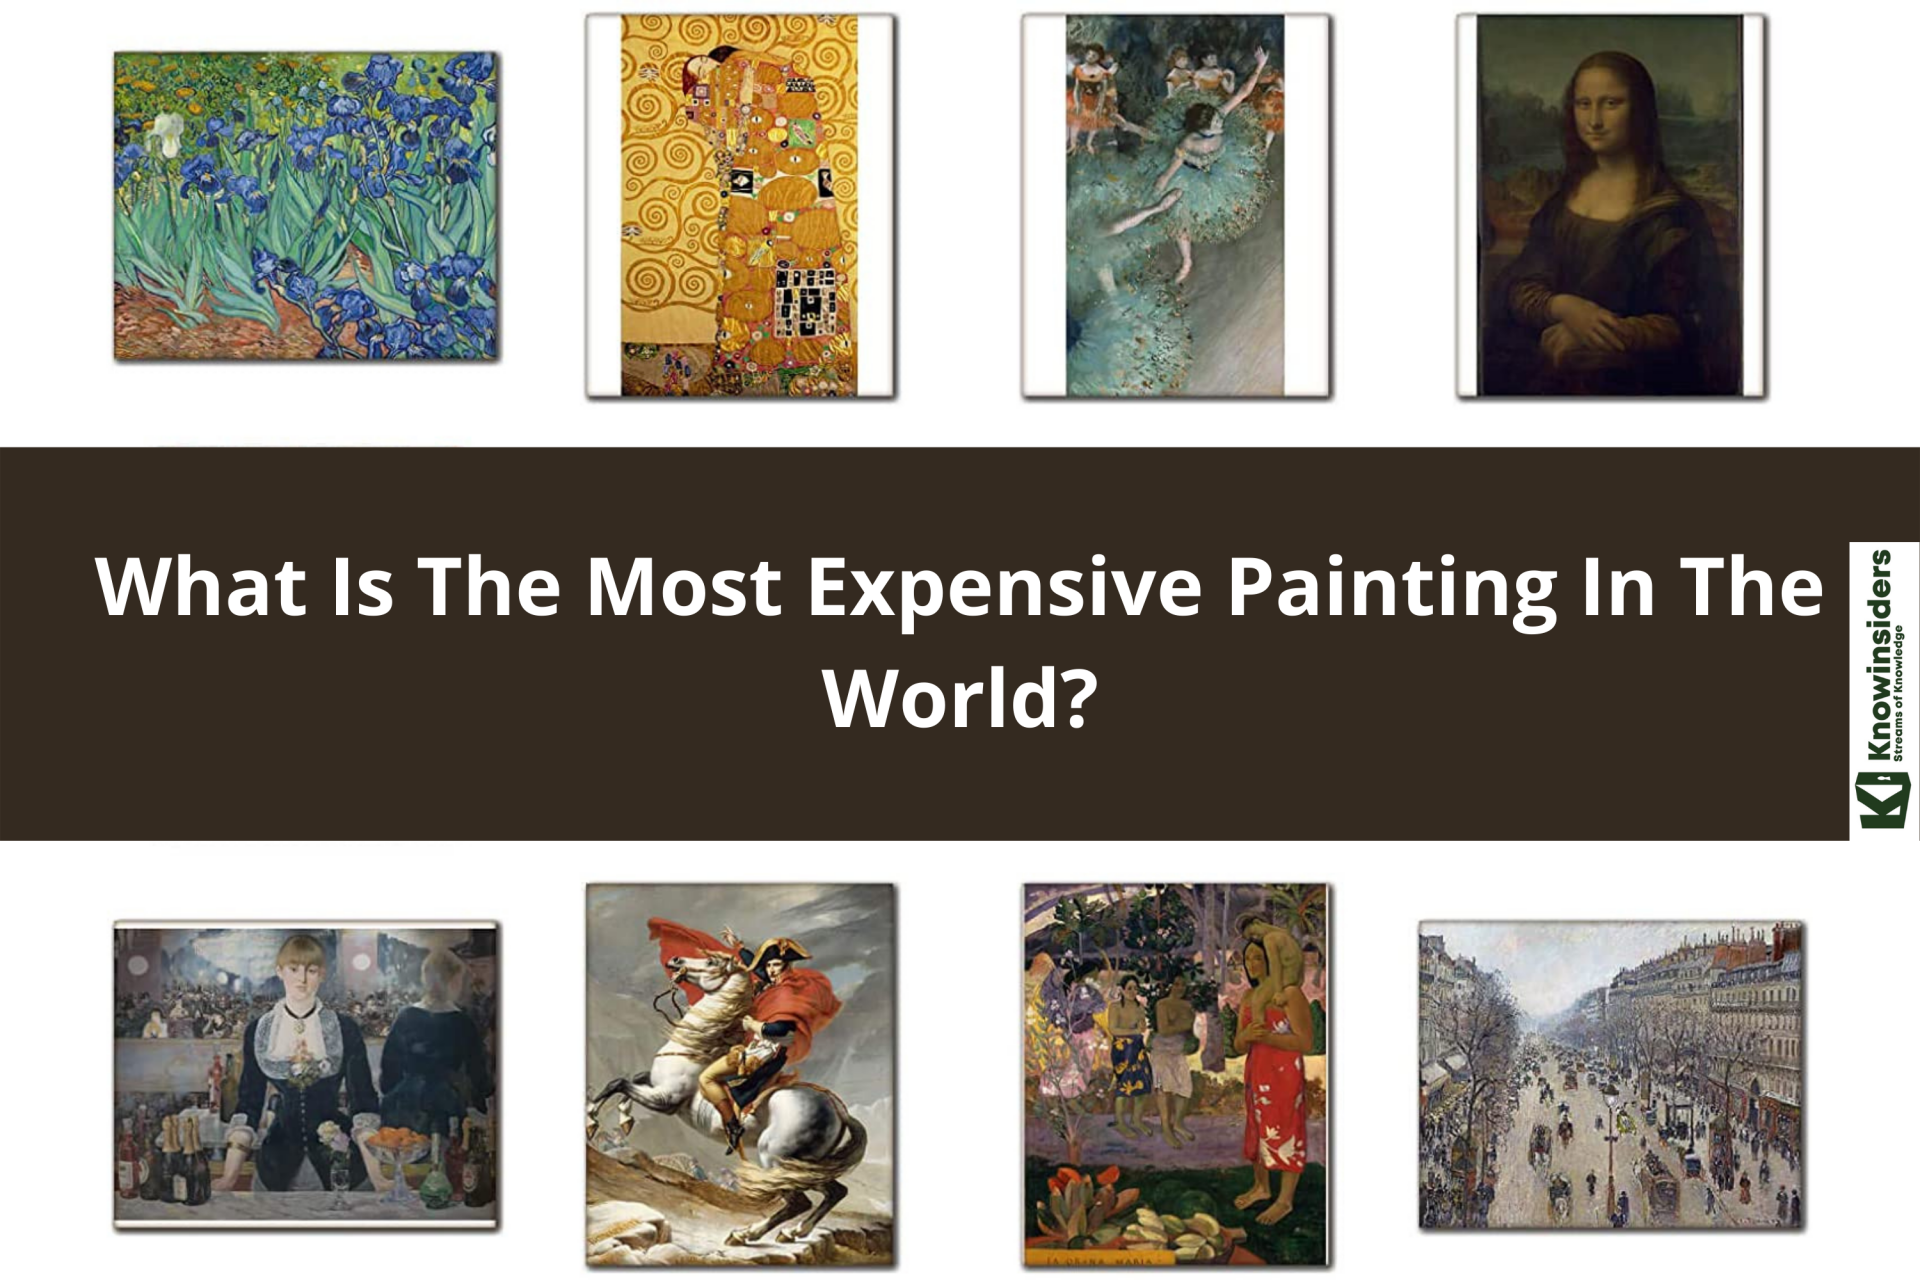 Facts About Salvator Mundi - Most Expensive Painting In The World